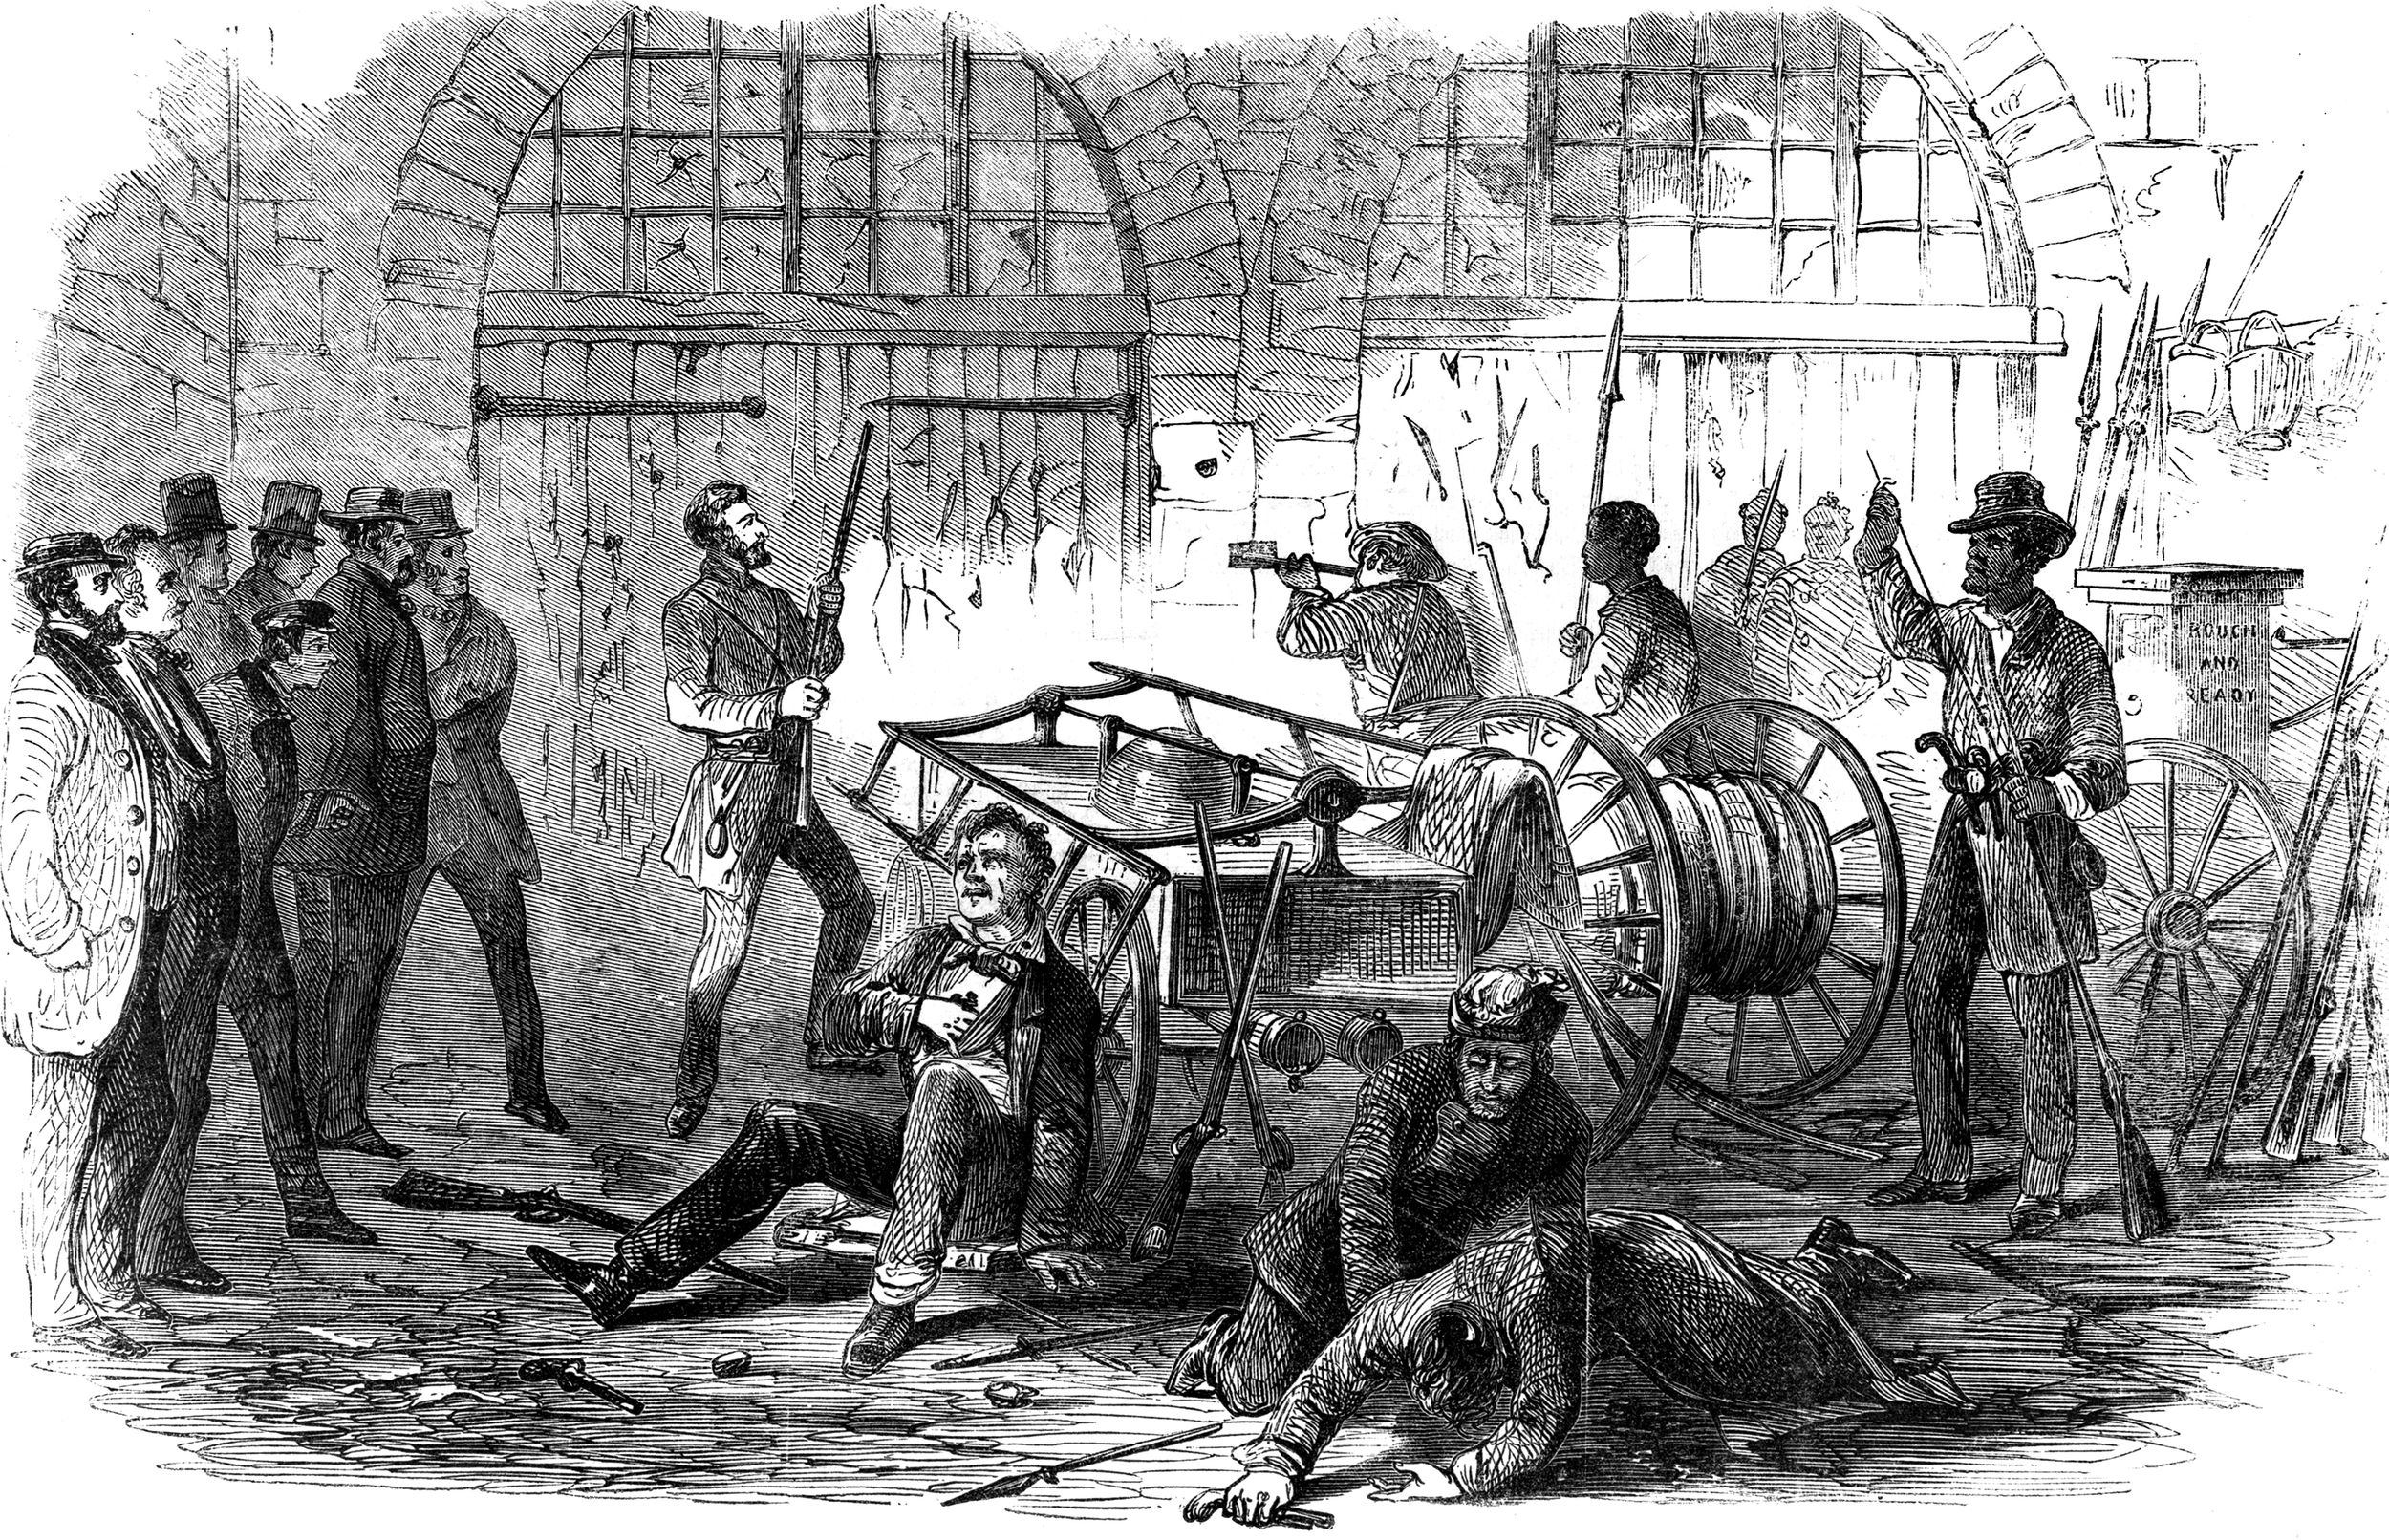 Inside the engine house, John Brown clutches his rifle moments before the Marines break in. Wounded raiders huddle in the foreground, while Colonel L. W. Washington, of Jefferson County, Virginia, and the other hostages watch the action from the left. Several pikes that Brown had planned to use to arm the slave uprising (which didn’t happen) appear to be stacked against the far right wall.